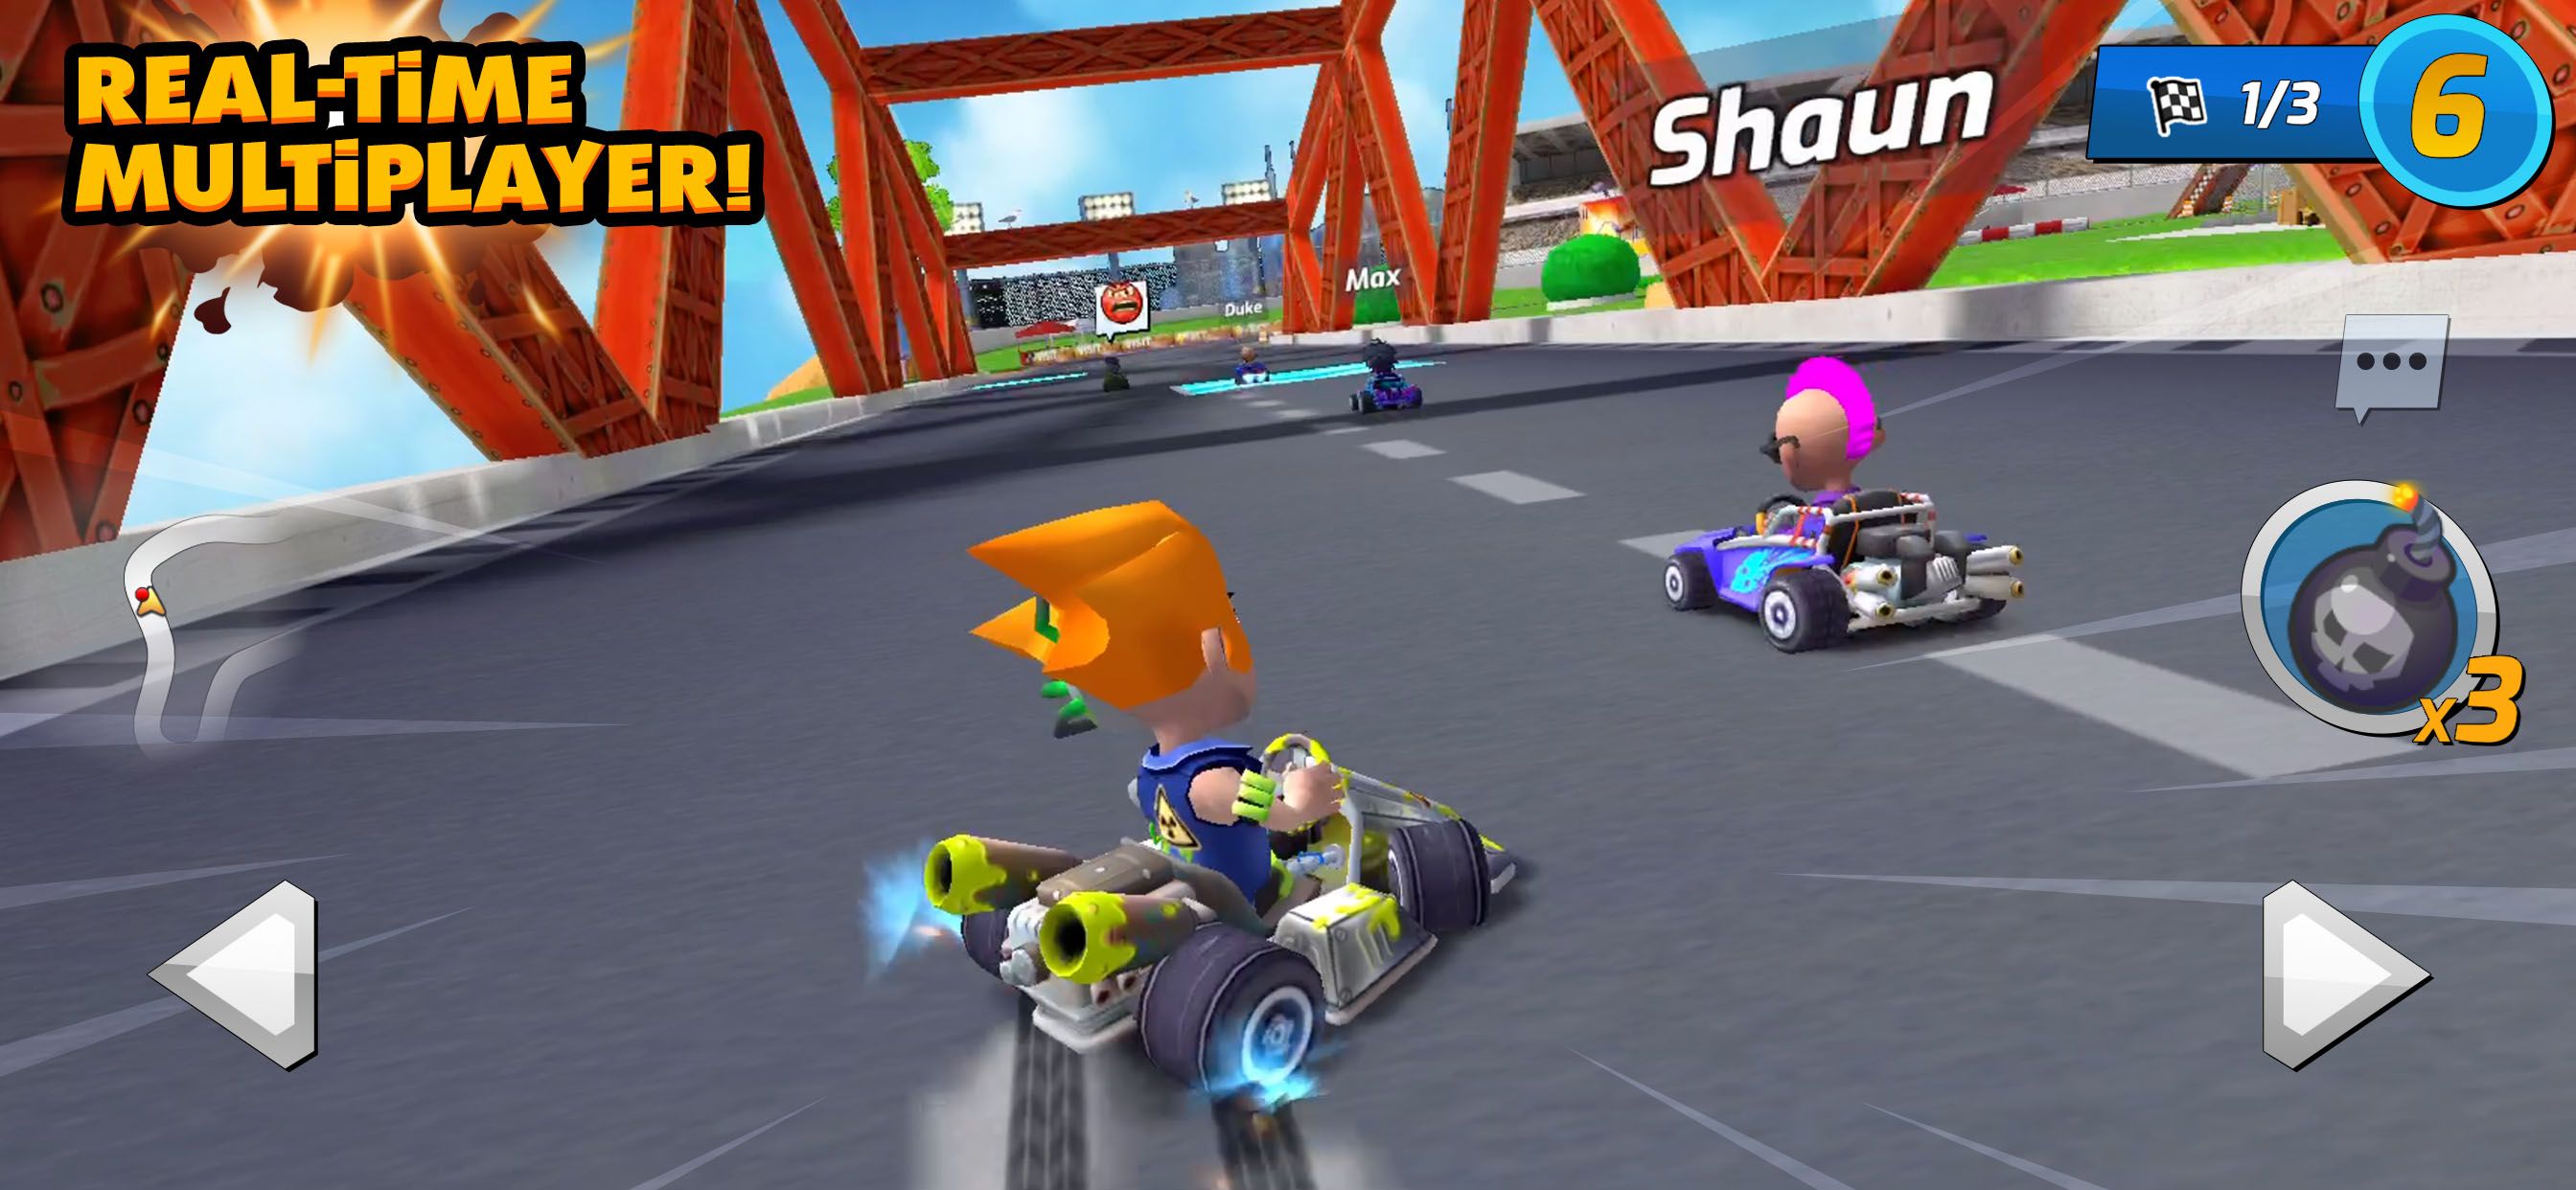 android-mario-kart-games-boom-karts-real-time-multiplayer